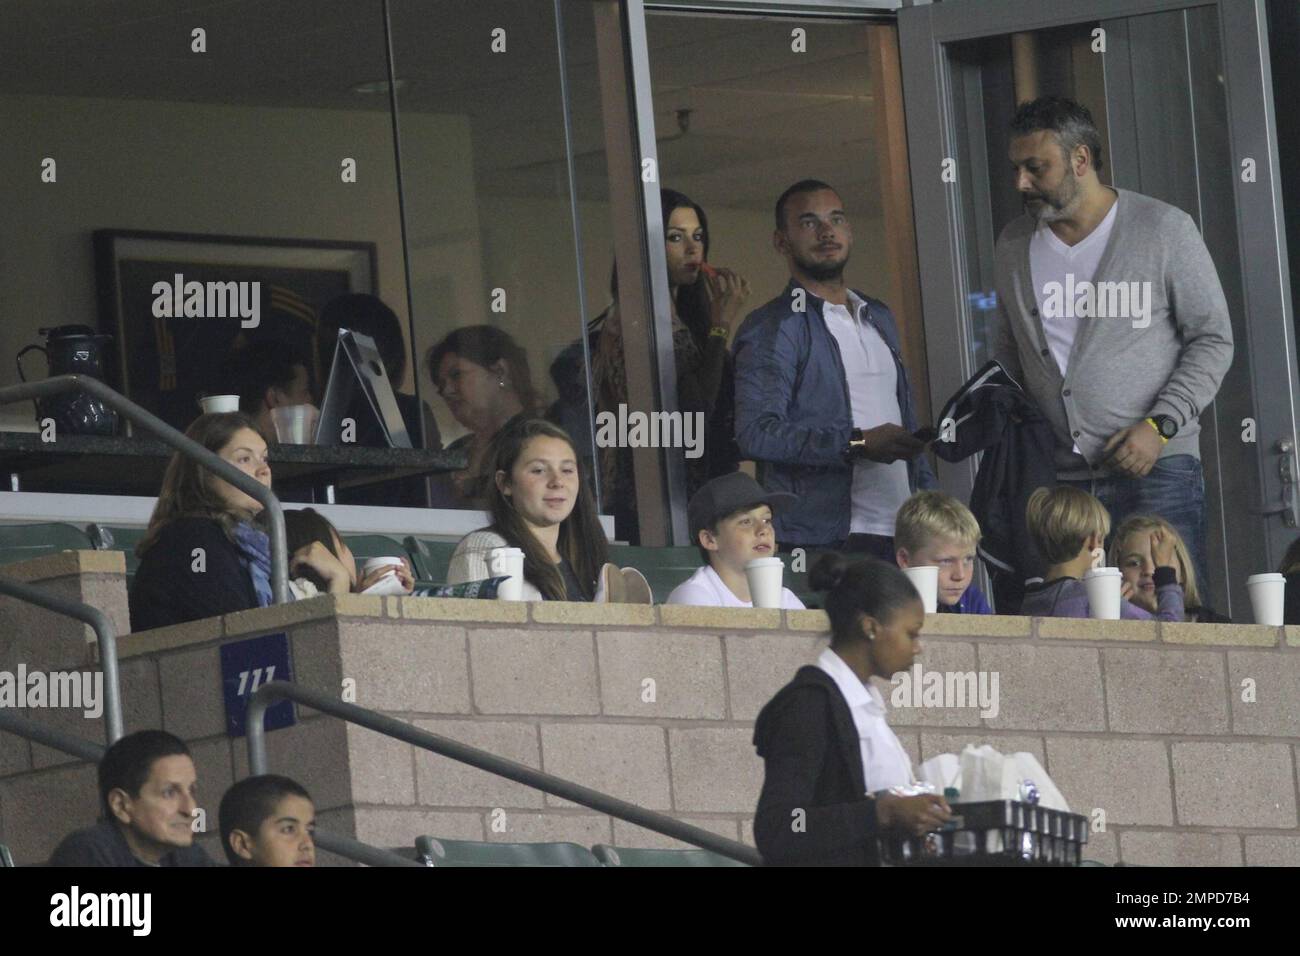 Brooklyn, Romeo and Cruz Beckham watch dad David as he leads the LA Galaxy to a 0-0 tie over the D.C. United. During the game D.C. United midfielder Fred sent Beckham flying with a hard tackle that drew a yellow card in the first half at Home Depot Center. Also  in the box with the boys was Wayne Sneijder and his wife, Dutch actress, Yolanthe Cabau van Kasbergen.  Beckham's pregnant wife Victoria did not appear to be at the game today.  Los Angeles, CA. 06/03/2011. Stock Photo